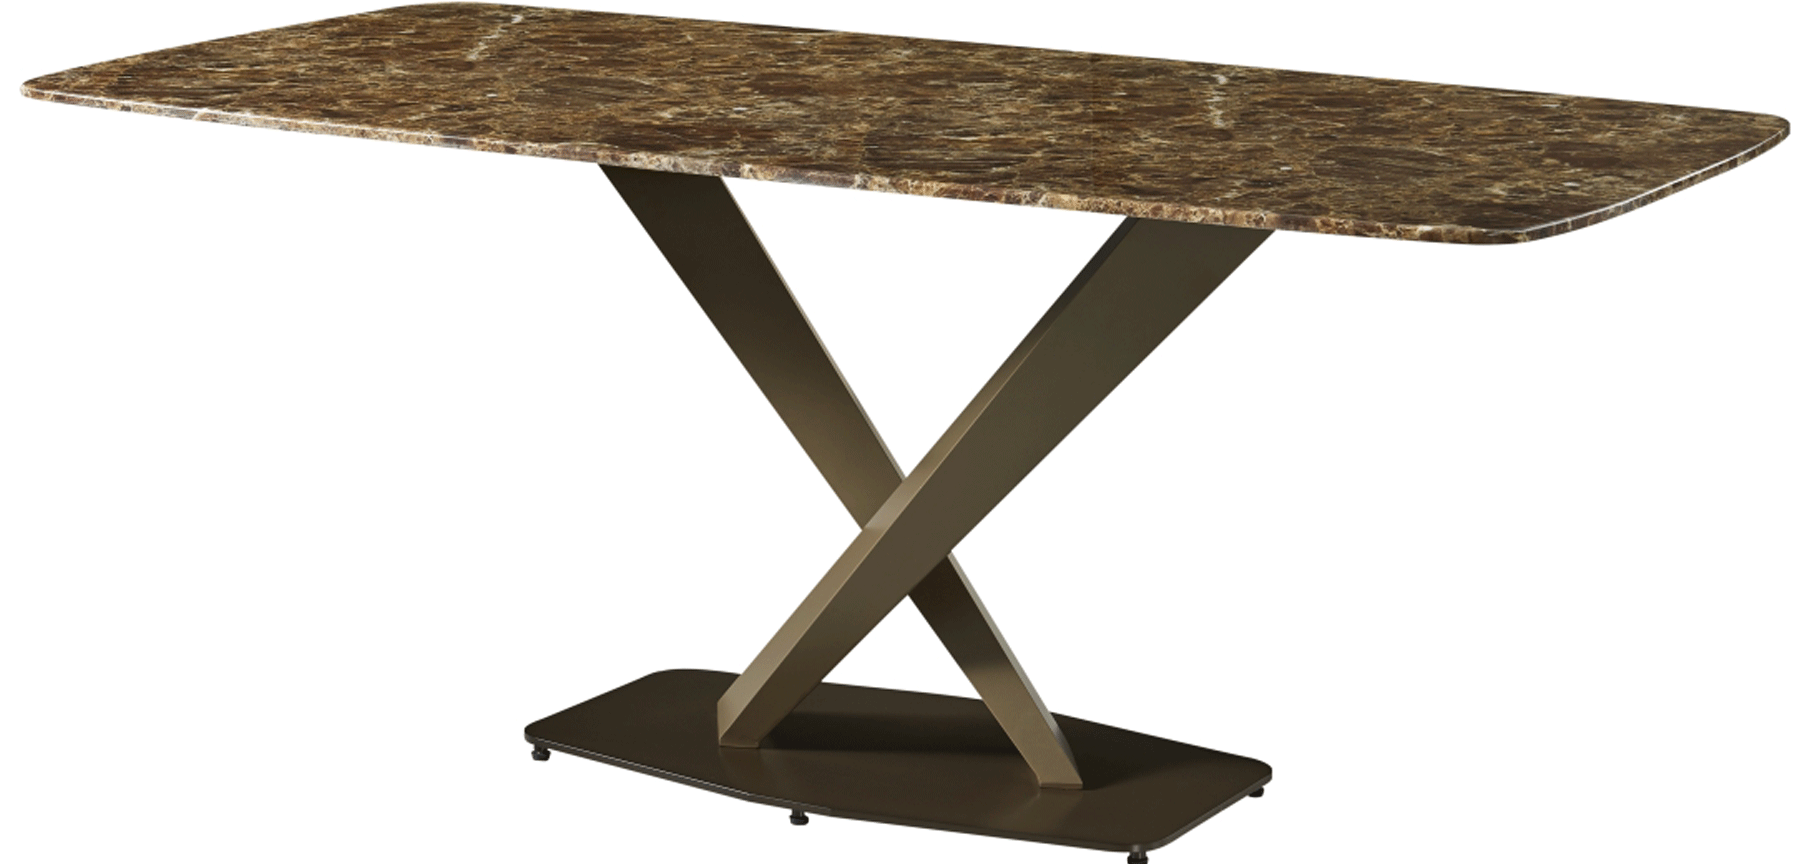 Wallunits Entertainment Centers 311 Marble Dining Table